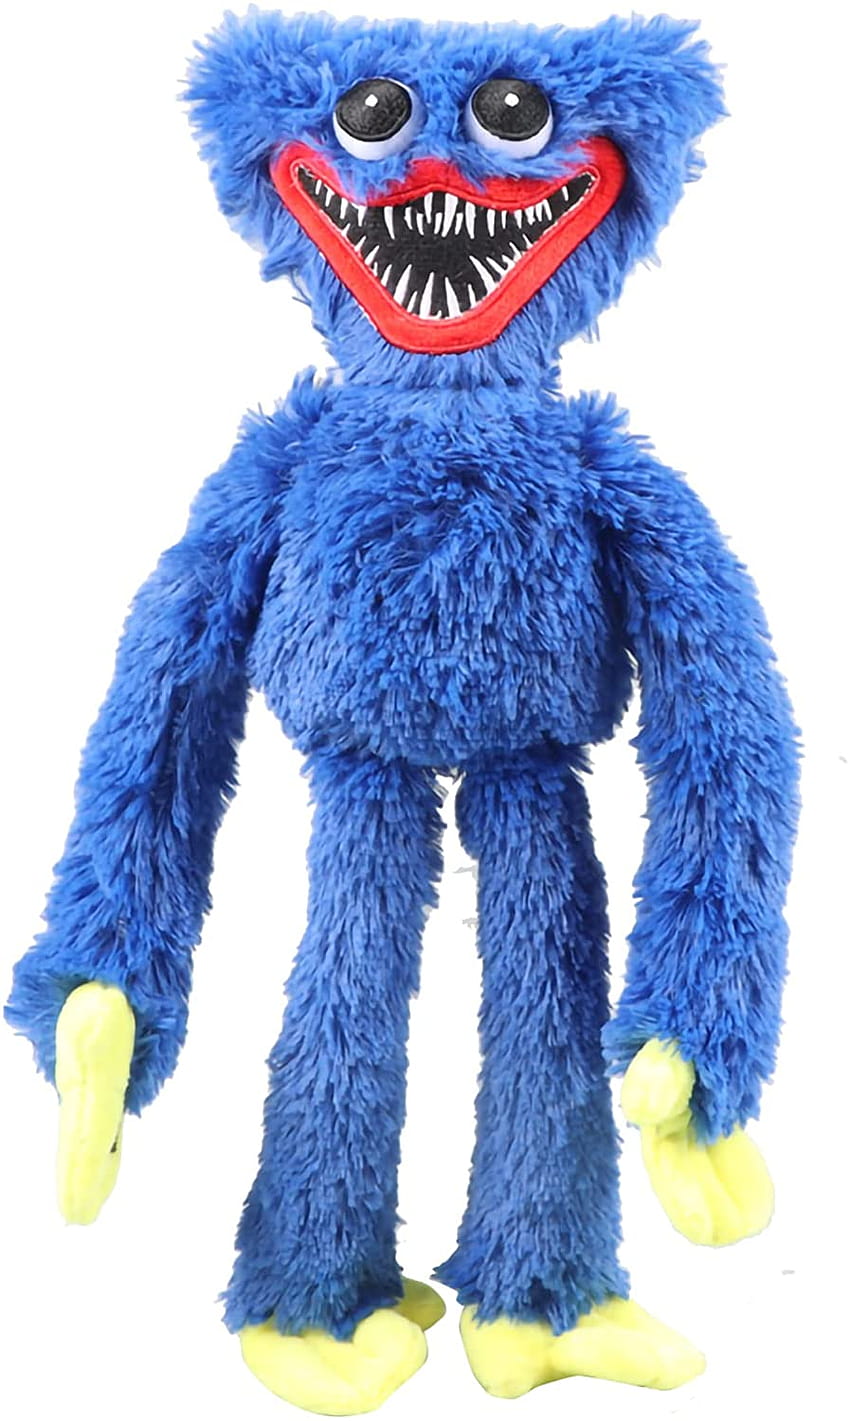 Huggy Wuggy Plush Toy, Blue Scary and Funny Plush Doll, Suitable ...